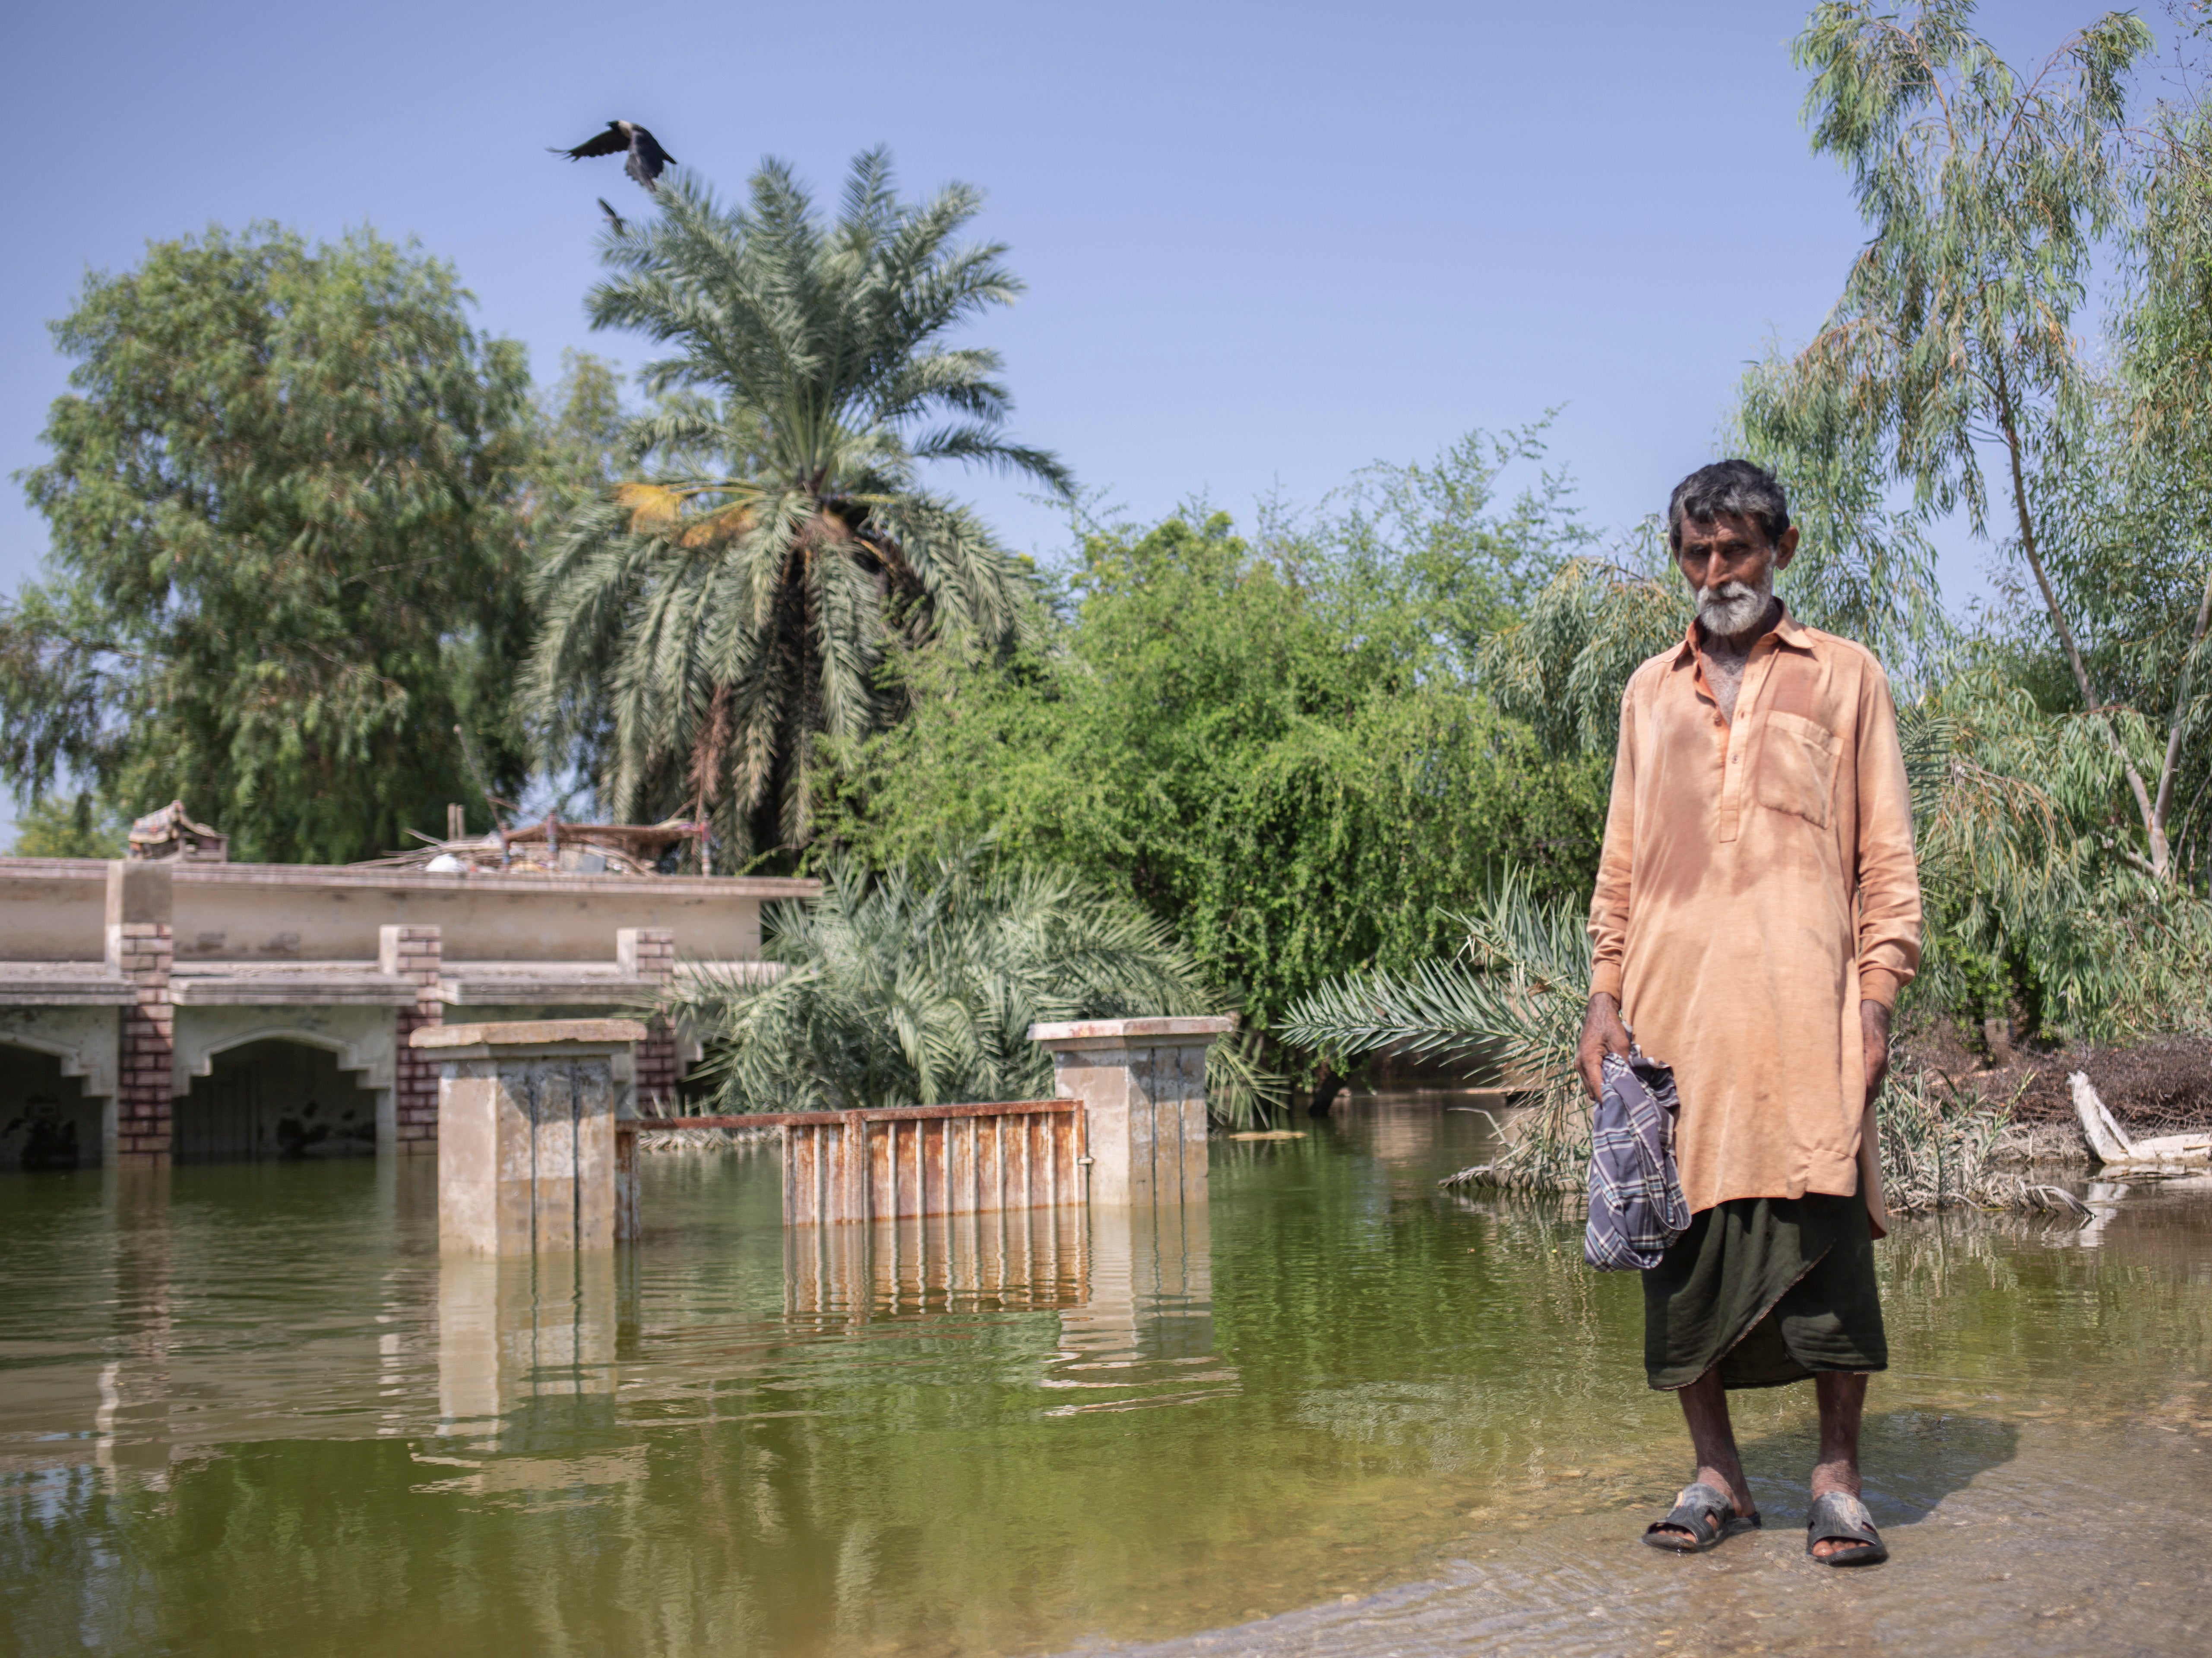 Ali Sher Langah lives in his village despite being surrounded with water as he didn't want to leave his house